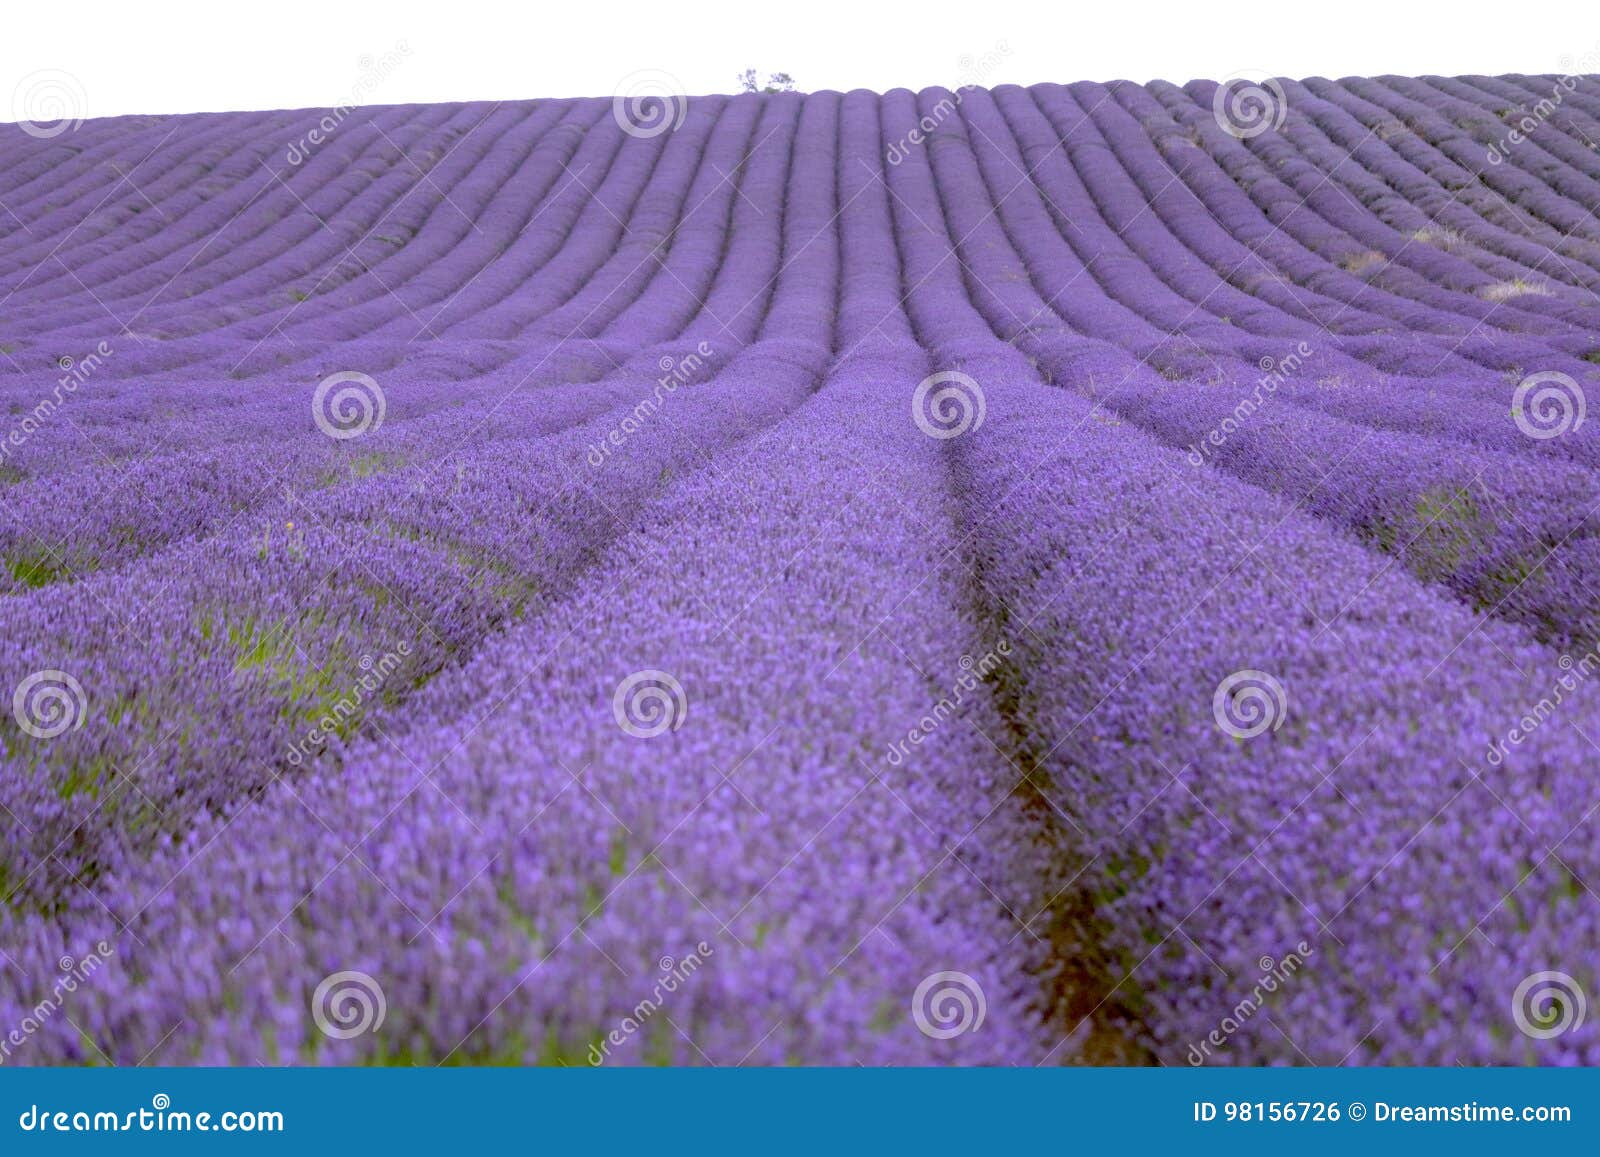 lavender and sunflower field in hitchin, england